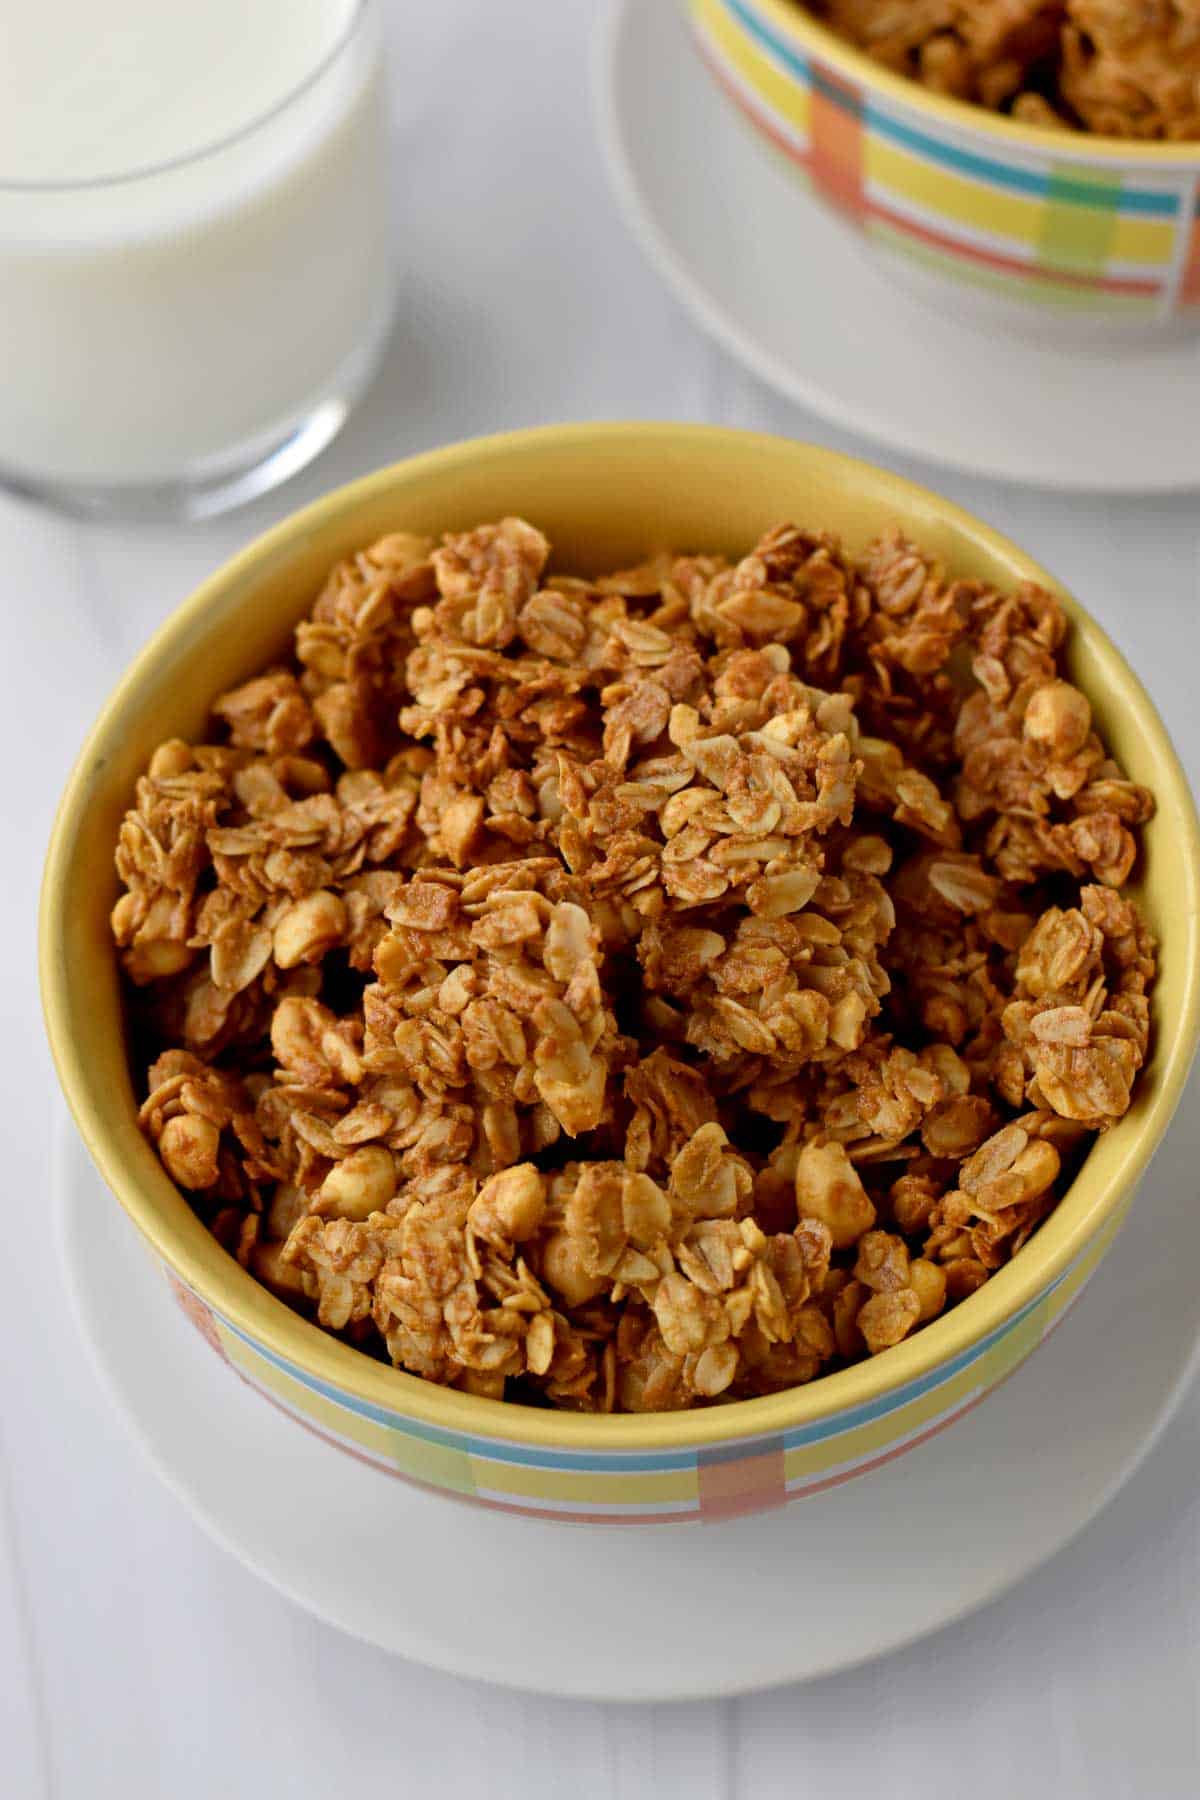 Two bowls of peanut butter granola and a glass of milk on counter.